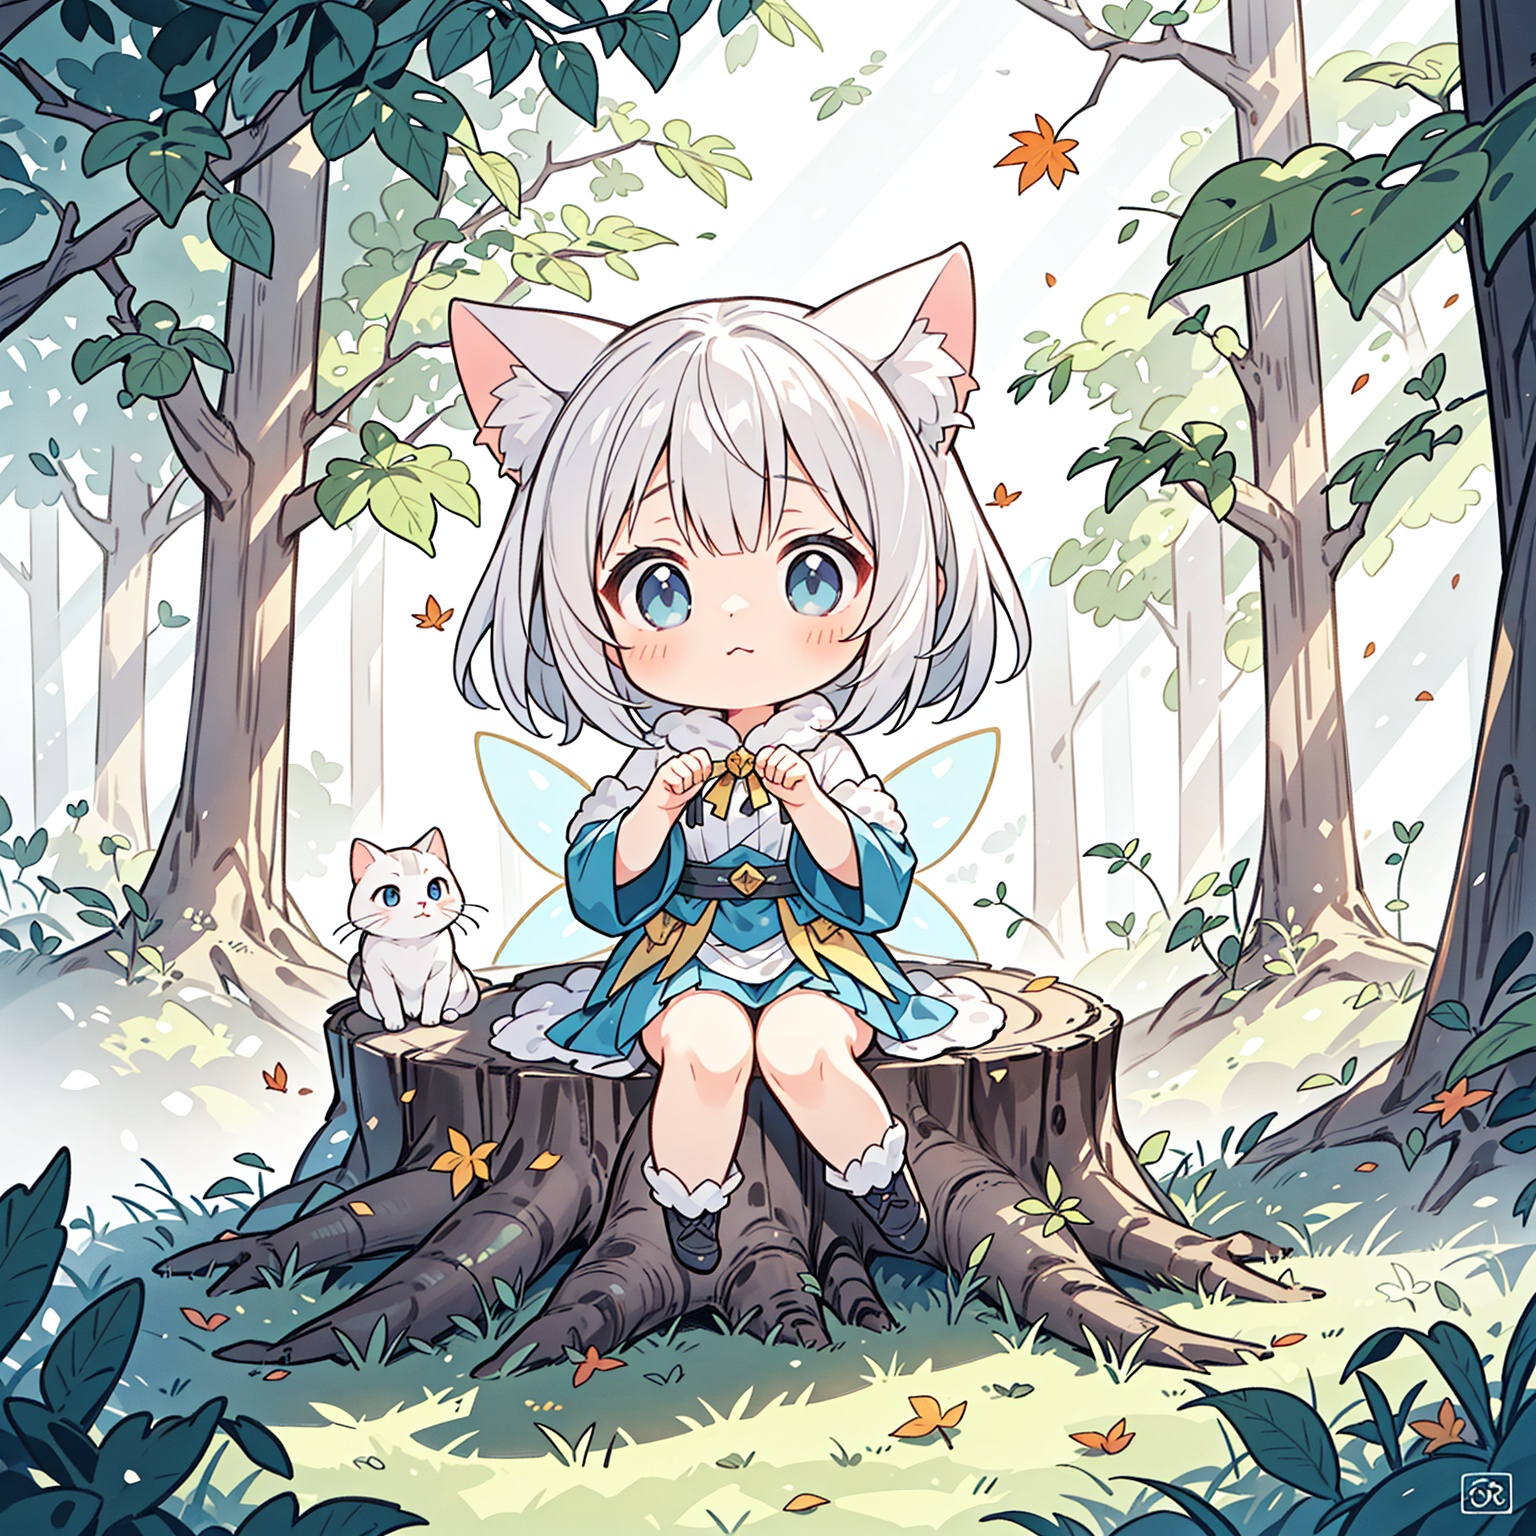 (a fairy tale setting:1.2), a digital artwork portraying a whimsical scene in an autumn forest, where a white-haired loli cat girl with captivating blue eyes sits atop a fallen tree trunk, (highly detailed:1.1), showcasing the vibrant hues of the autumn foliage, (magical ambiance:1.2), immersing the viewer in a world of enchantment and wonder, (cat-like grace:1.1), as the loli cat girl sits with elegance and poise, (soft golden light:1.1), filtering through the canopy of trees, casting a warm glow on her fur and the surrounding leaves, (dynamic composition:1.1), capturing the innocence and curiosity of the white-haired loli cat girl in the tranquil autumn forest, inviting viewers to join her in a fairy tale setting, where she finds solace and adventure amidst the beauty of nature, perched upon a fallen tree trunk, ready to embark on a whimsical journey.